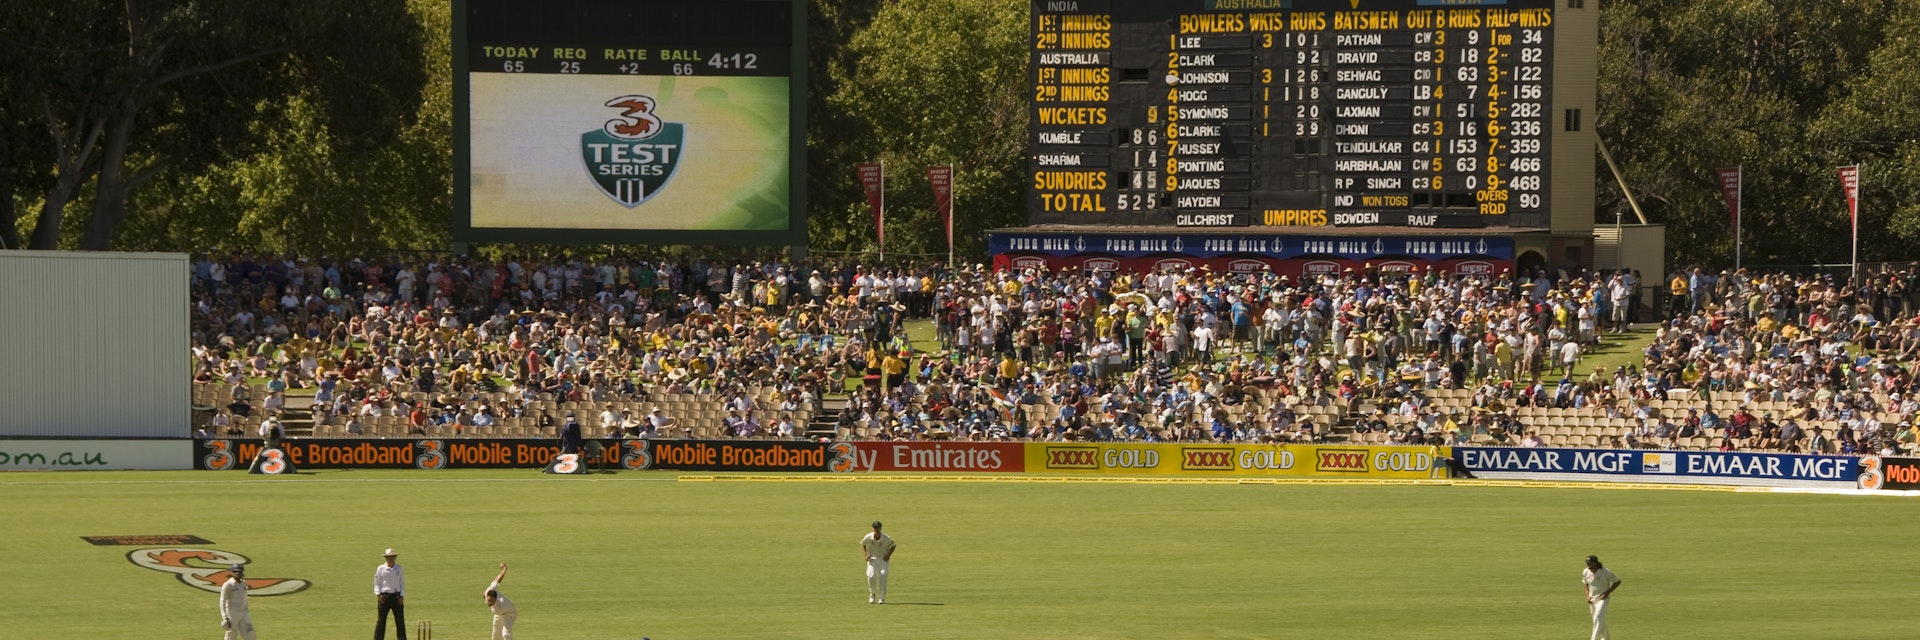 Test cricket match at the Adelaide Oval with the heritage scoreboard in background.